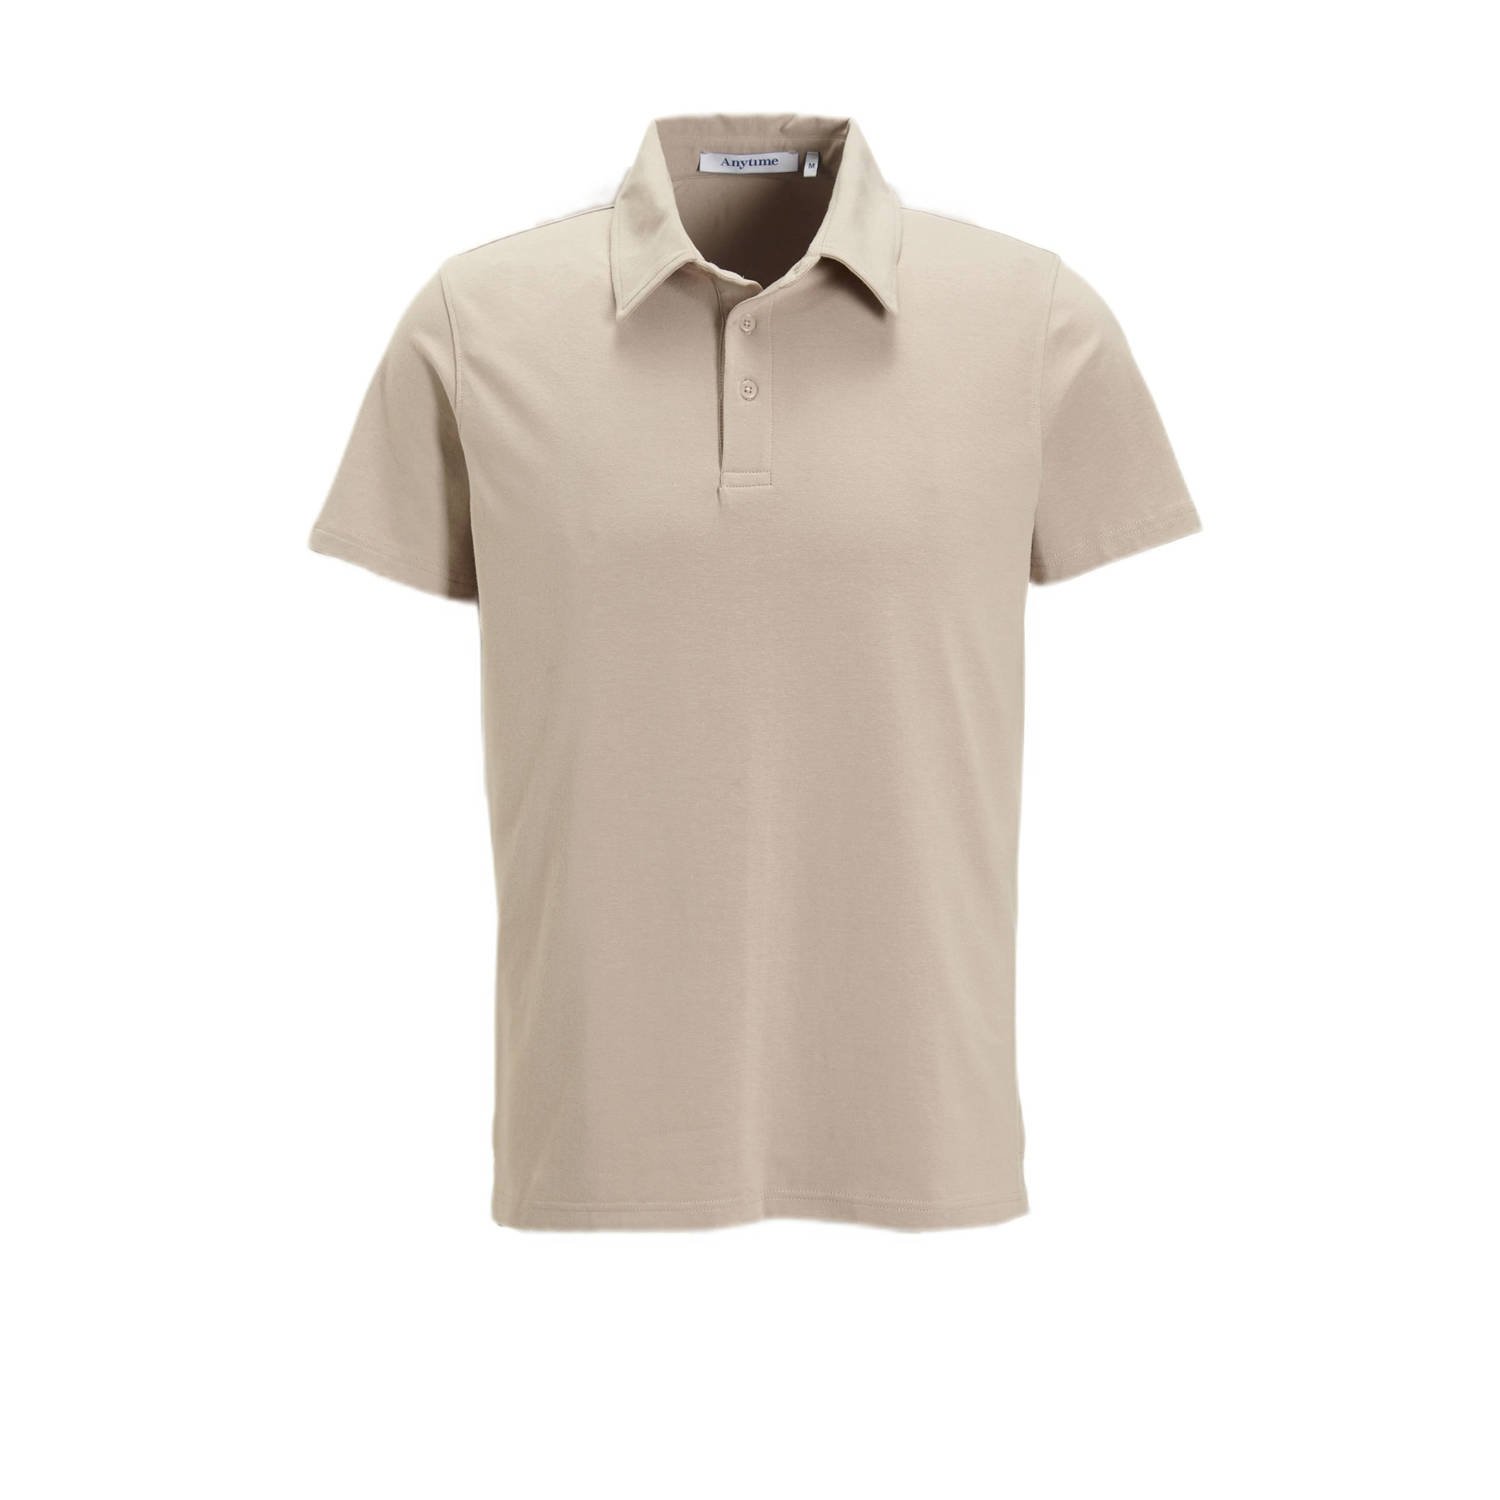 Anytime slim jersey polo beige